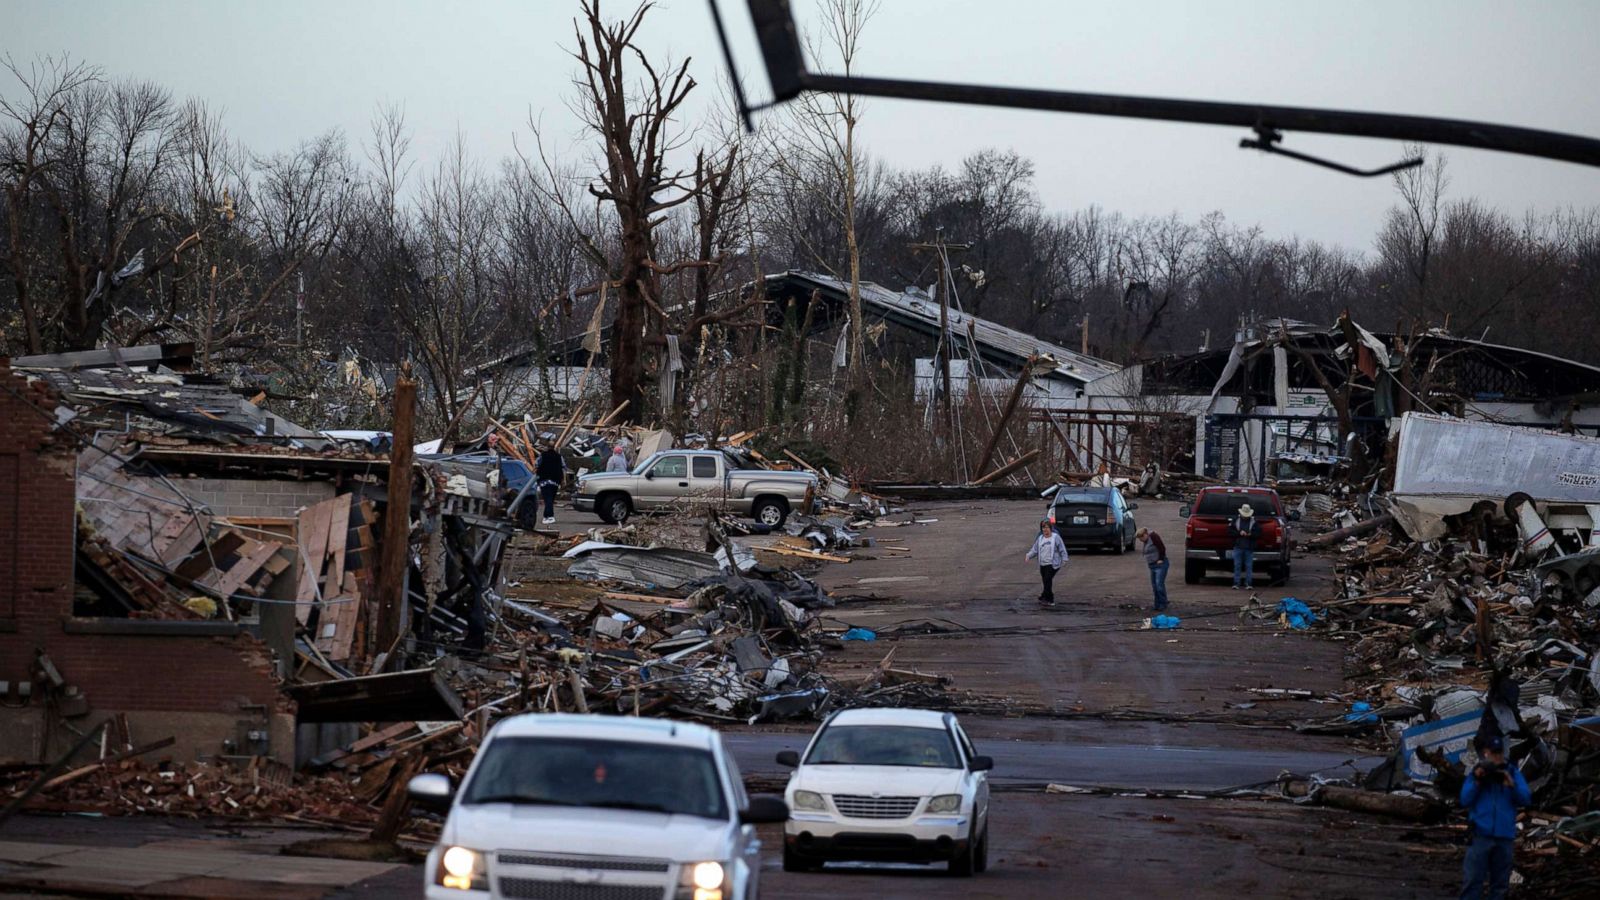 Over 70 dead as 22 reported tornadoes rip across South, Midwest - ABC News